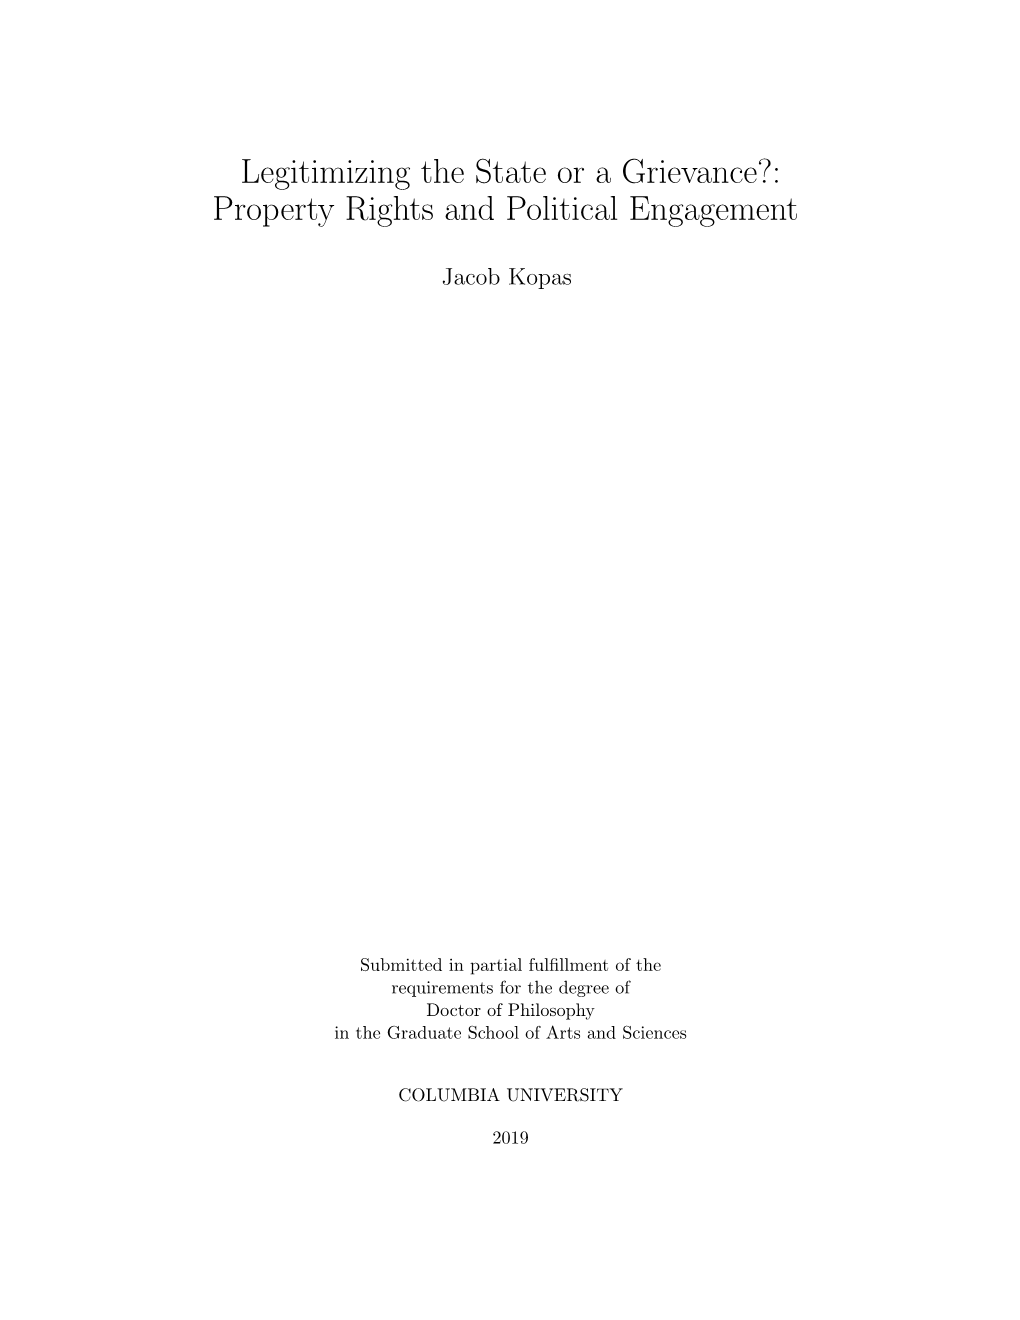 Property Rights and Political Engagement